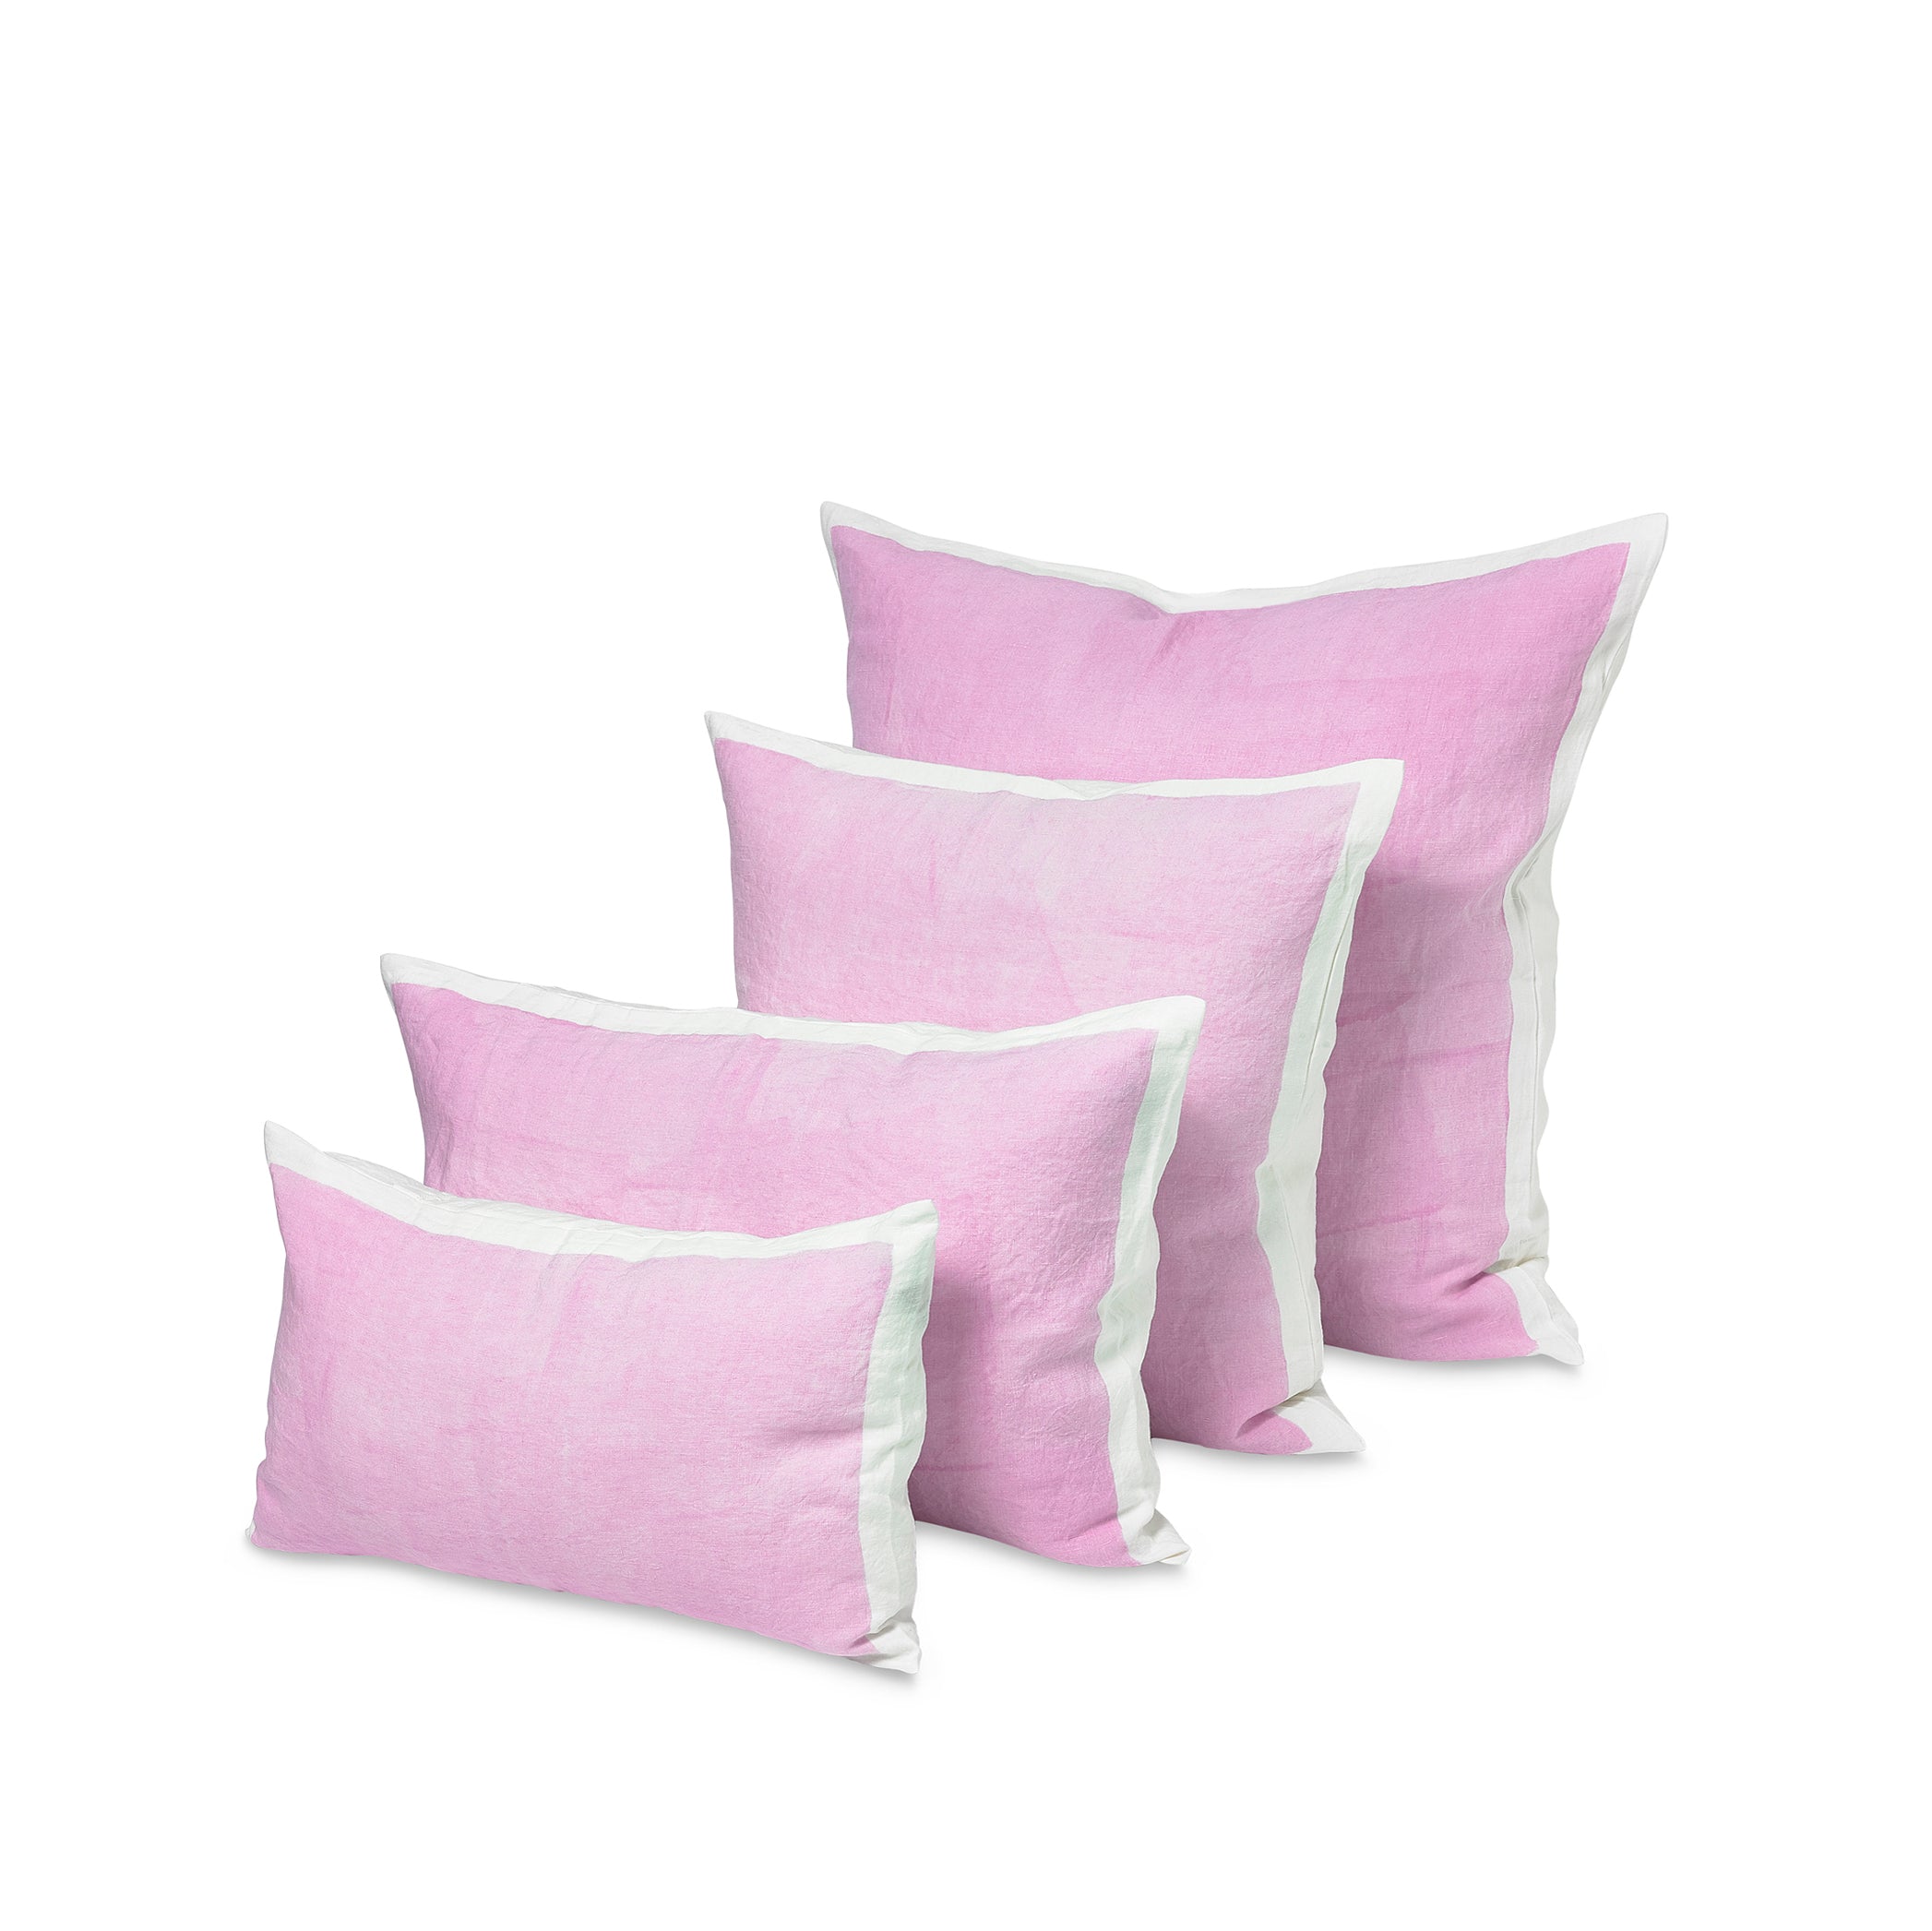 Hand Painted Linen Cushion in Pale Pink, 60cm x 60cm